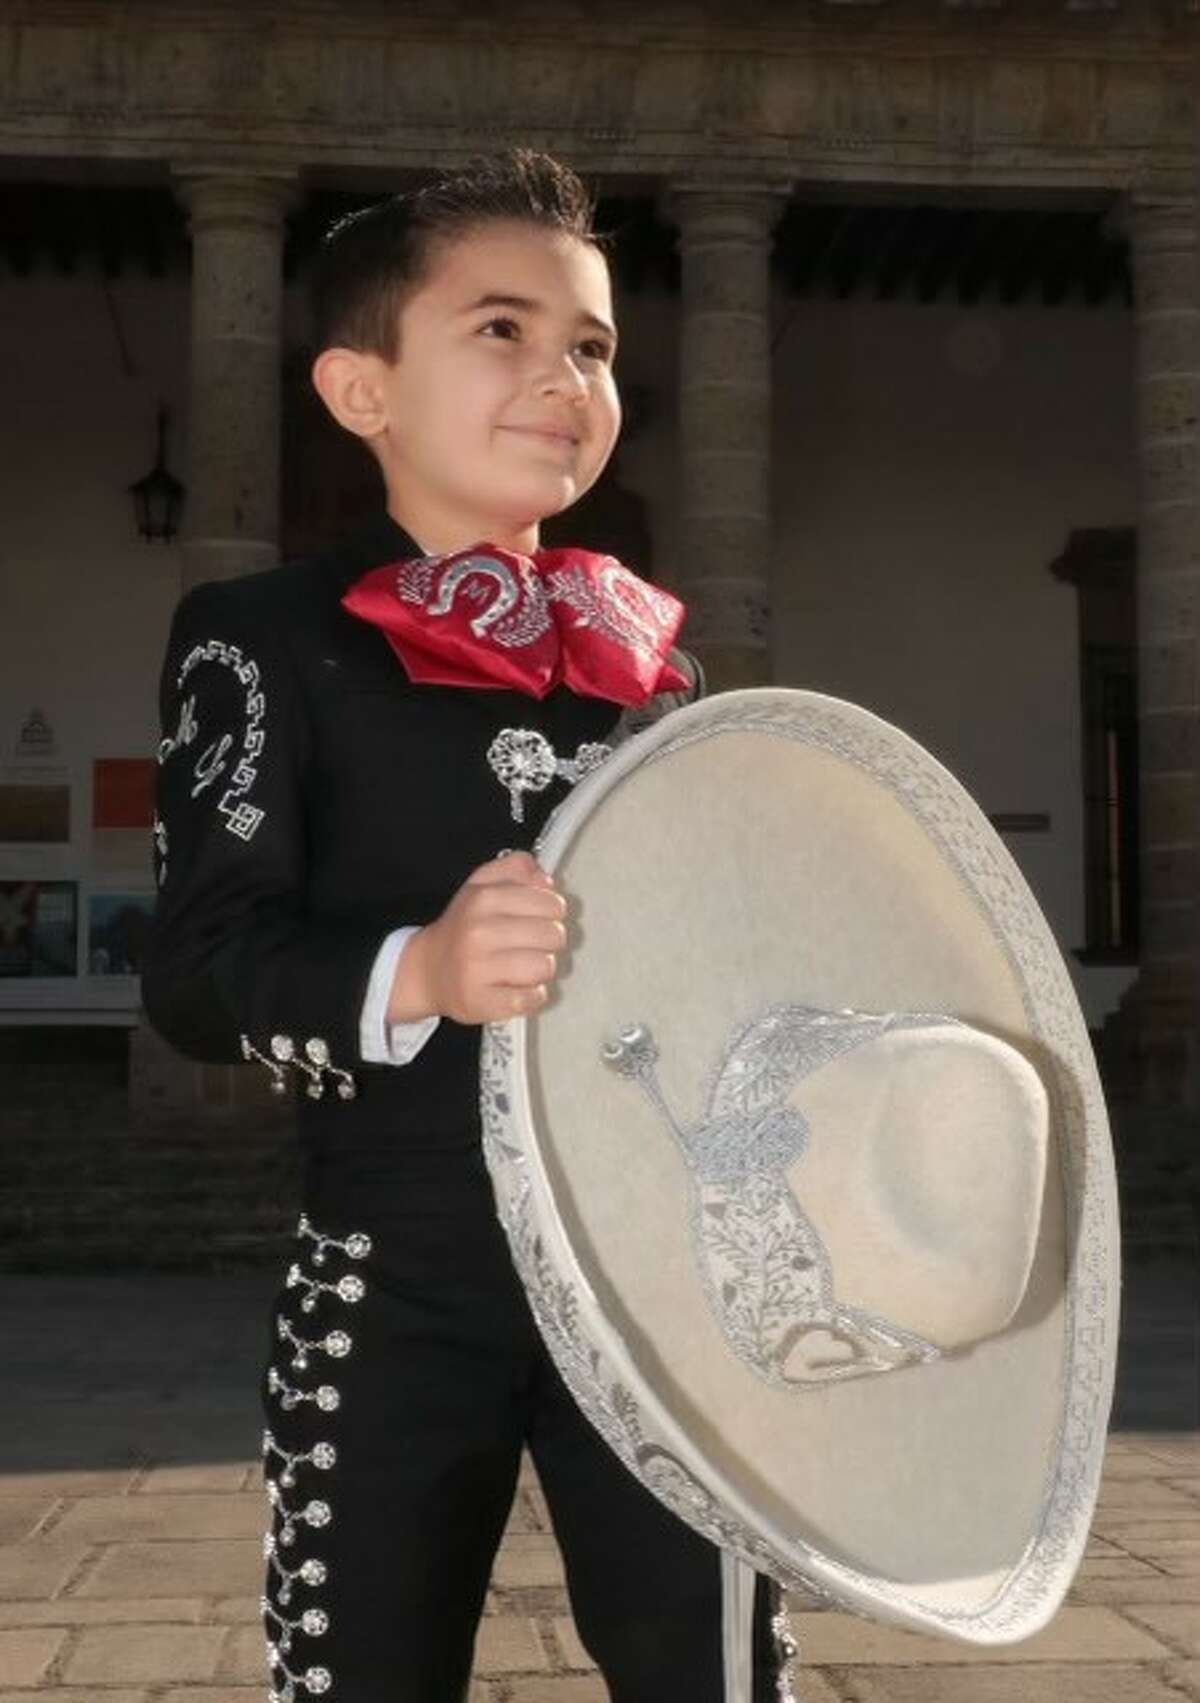 Mateo López, 7, set a Guinness World Record for being the youngest mariachi singer when he was 4 years and 236 days old in 2019.